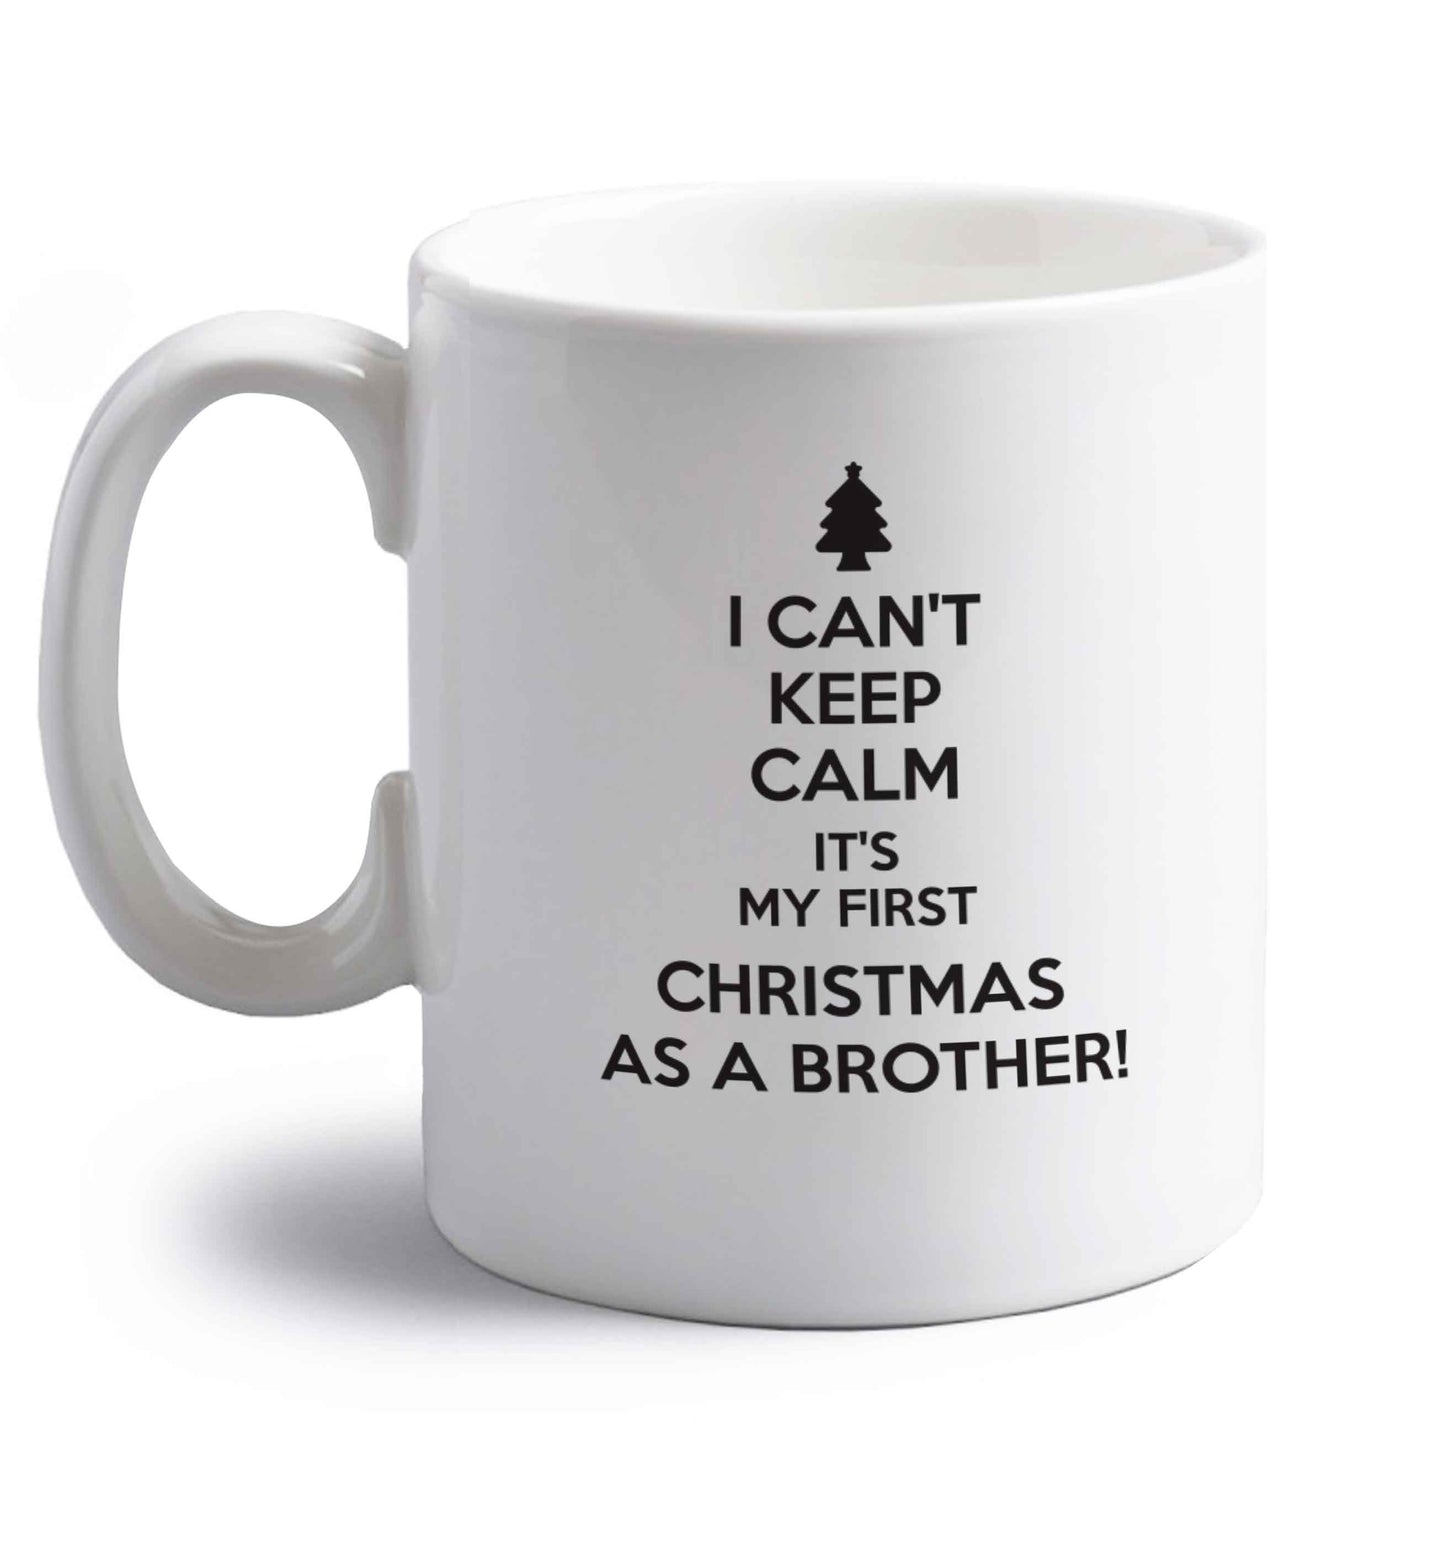 I can't keep calm it's my first Christmas as a brother! right handed white ceramic mug 